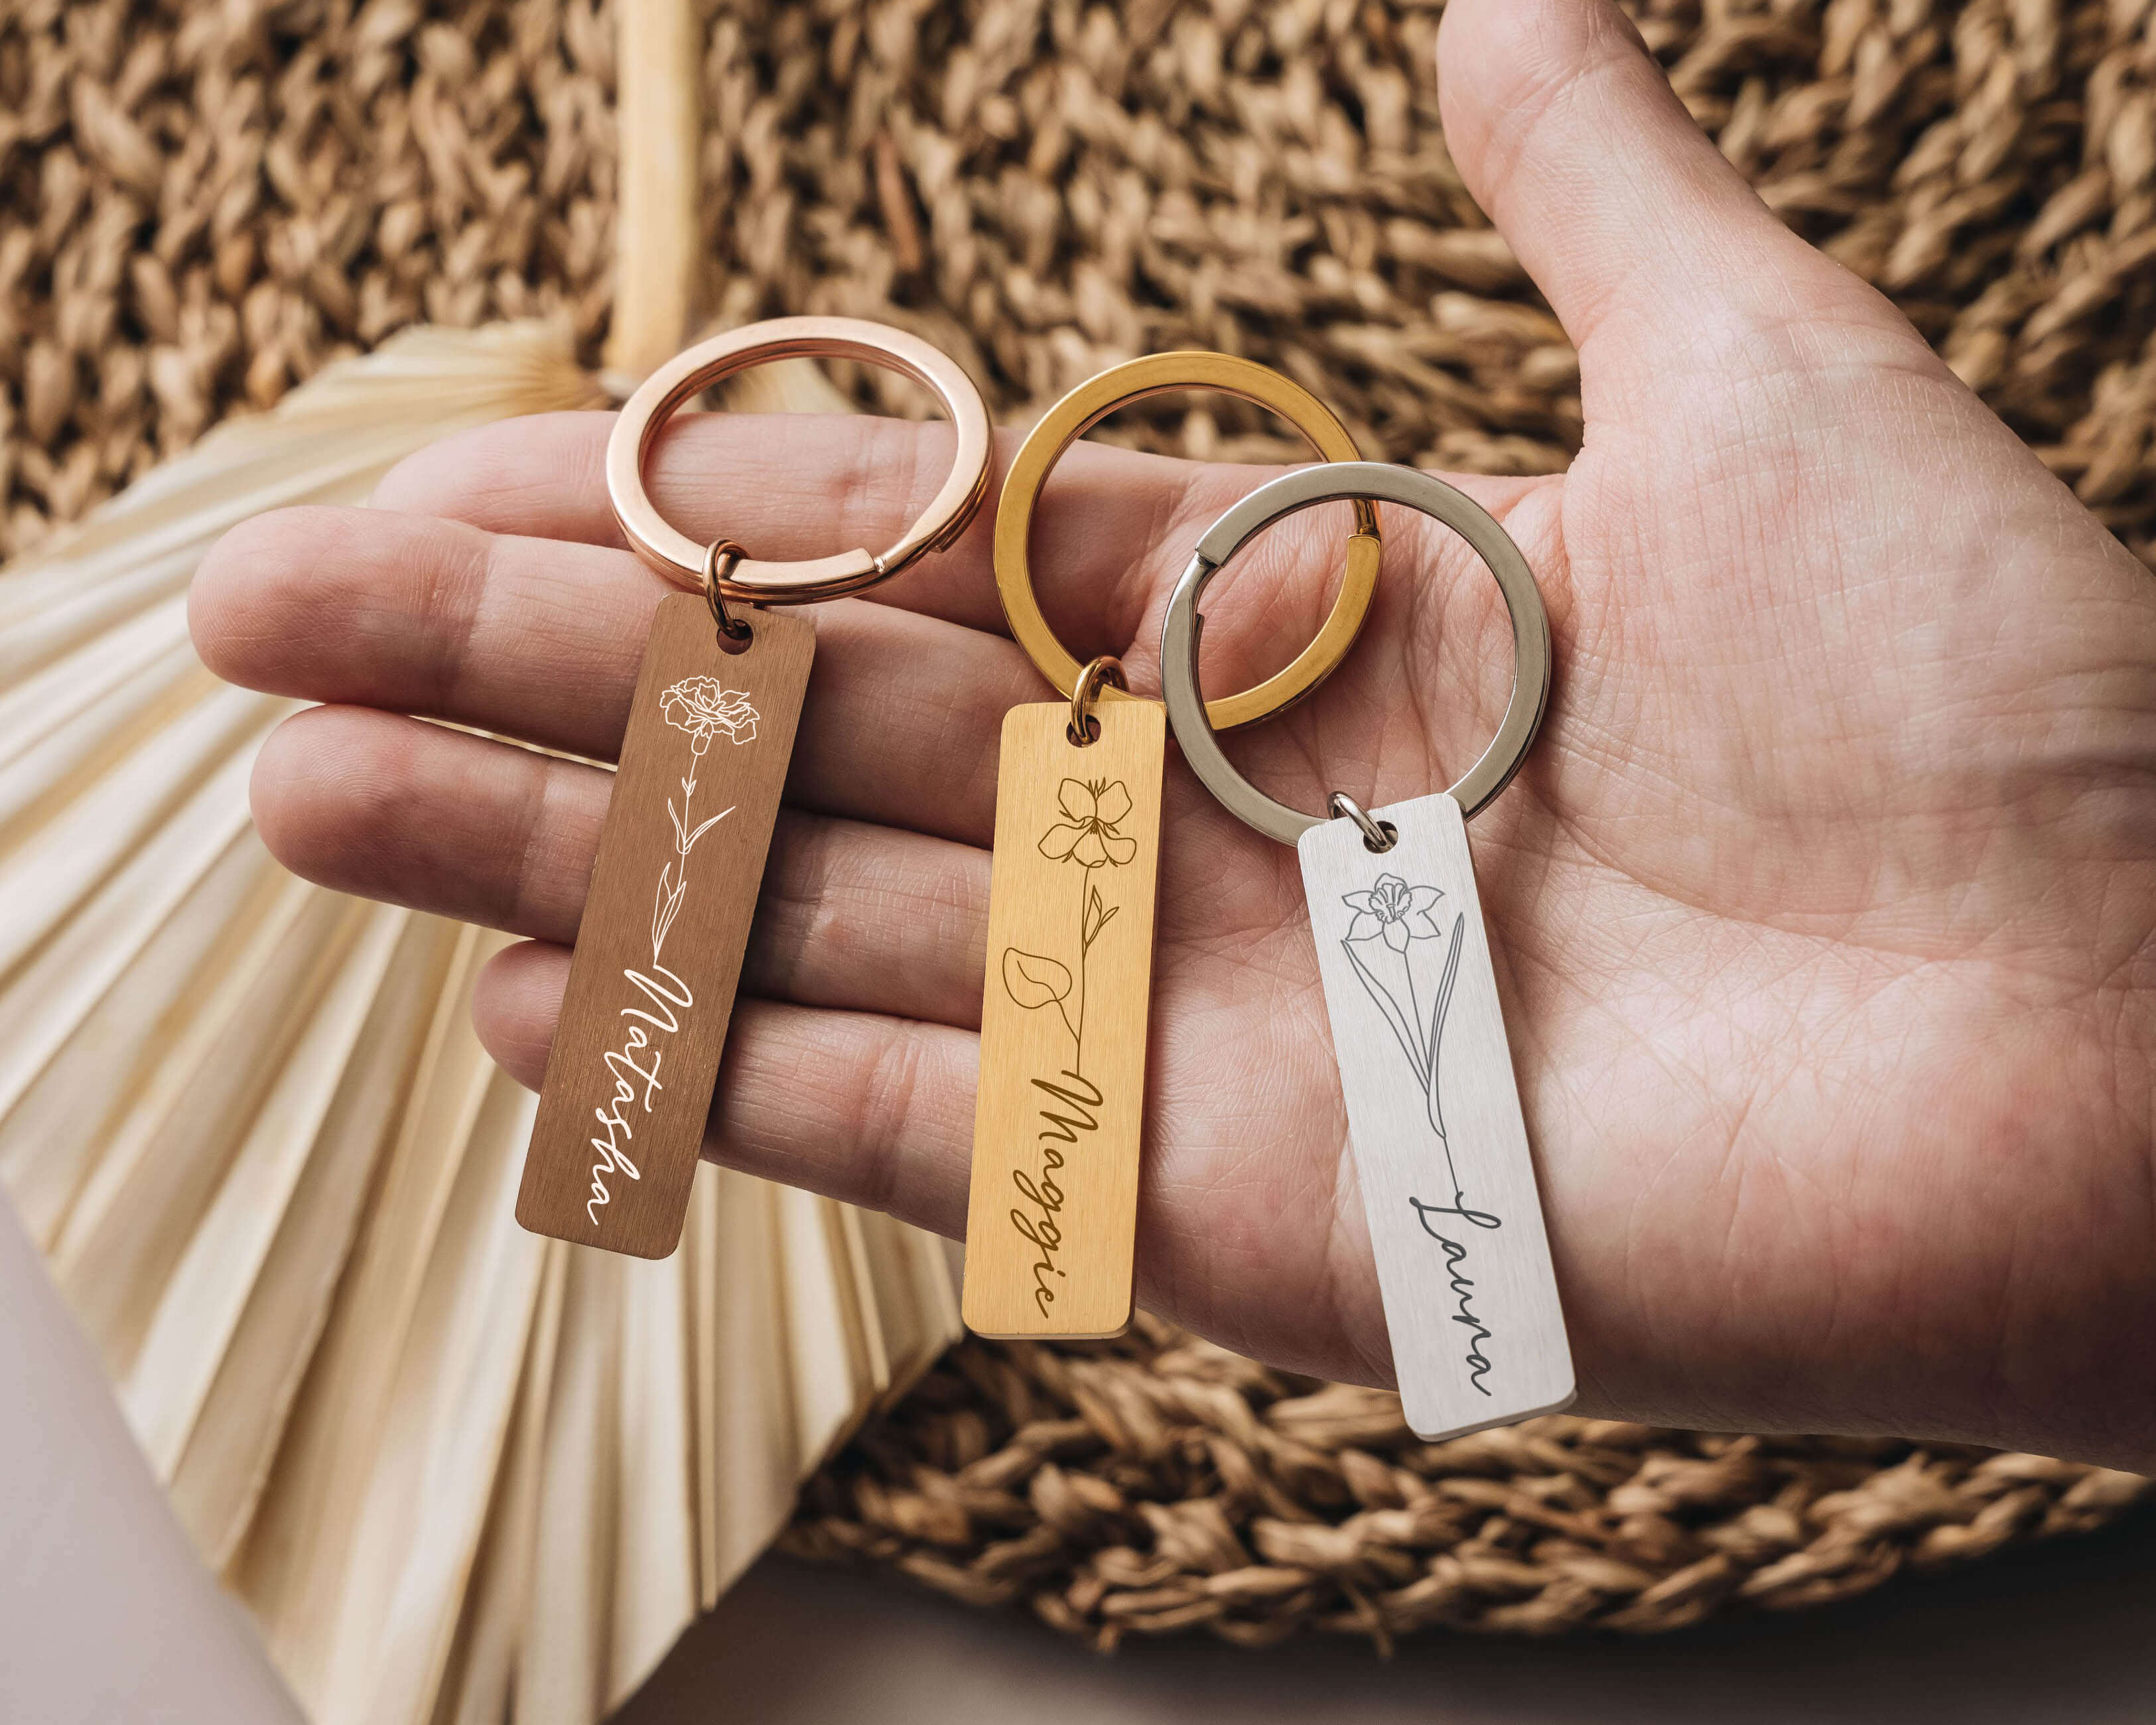 Gold, Rosegold and Silver Personalized Keychains with birth flower image and name.